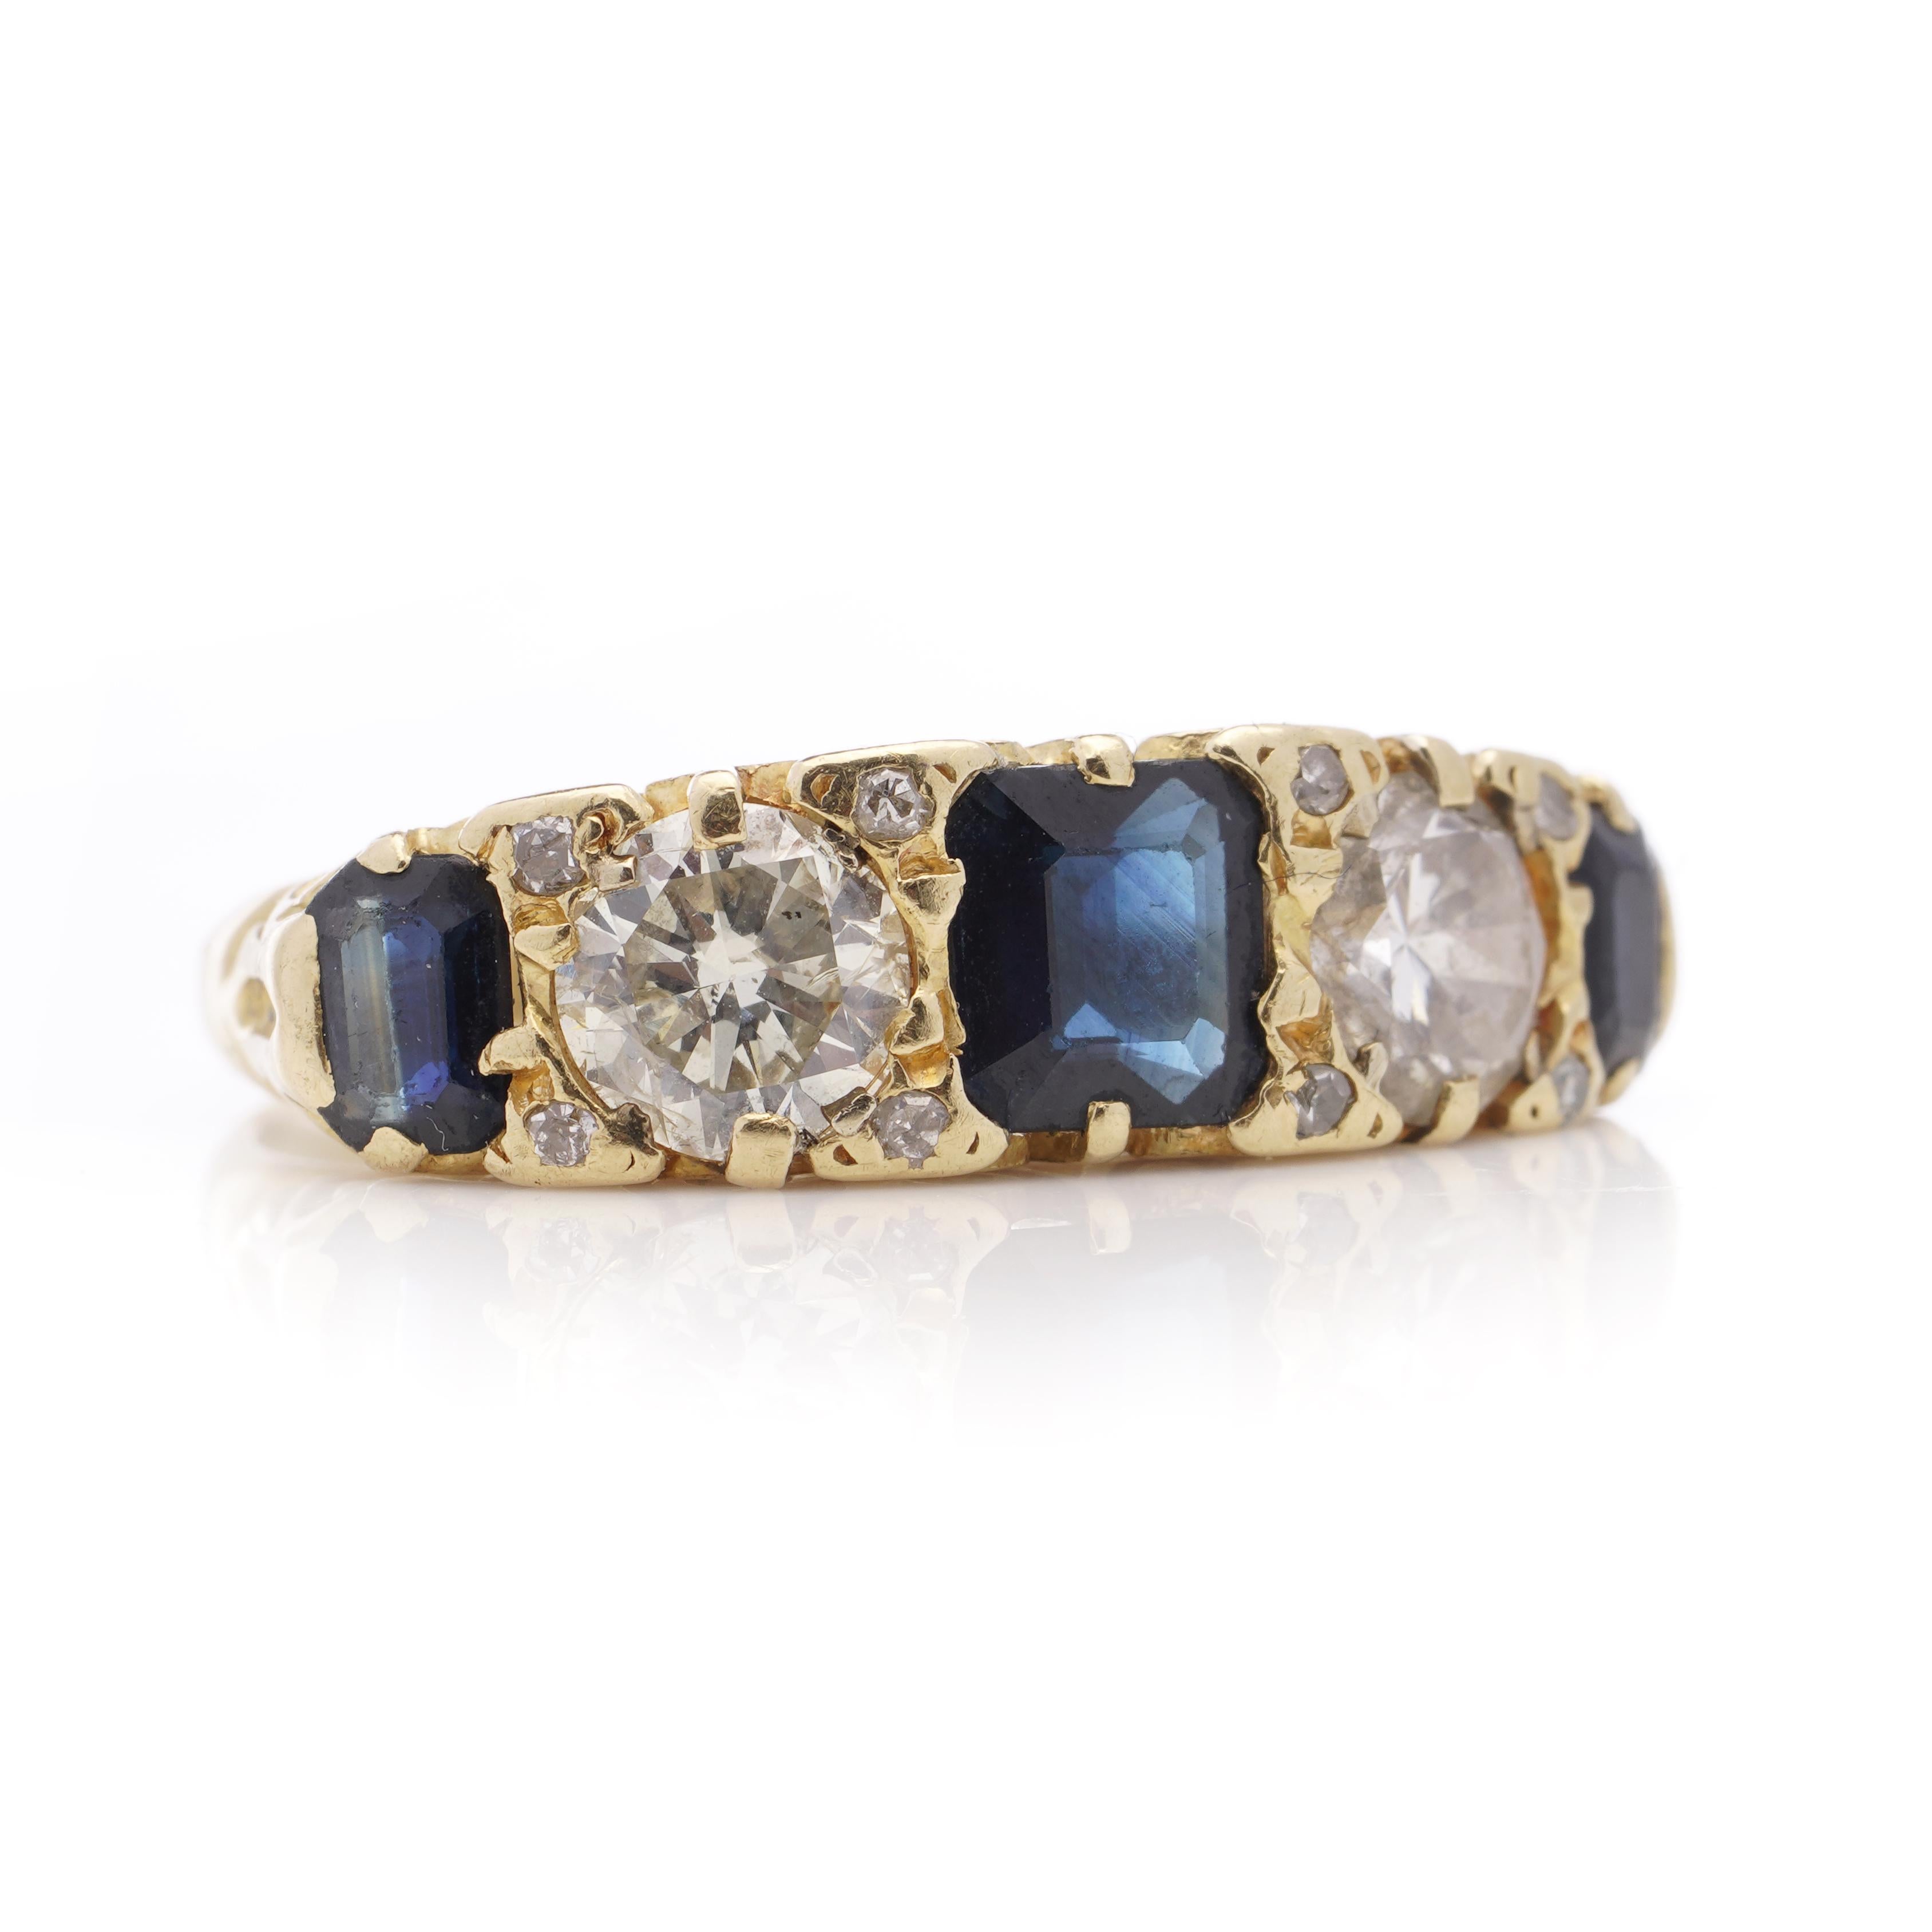 Vintage 18 Karat Yellow Gold 5 Stone Ladies Ring with Sapphires and Diamonds In Good Condition For Sale In Braintree, GB